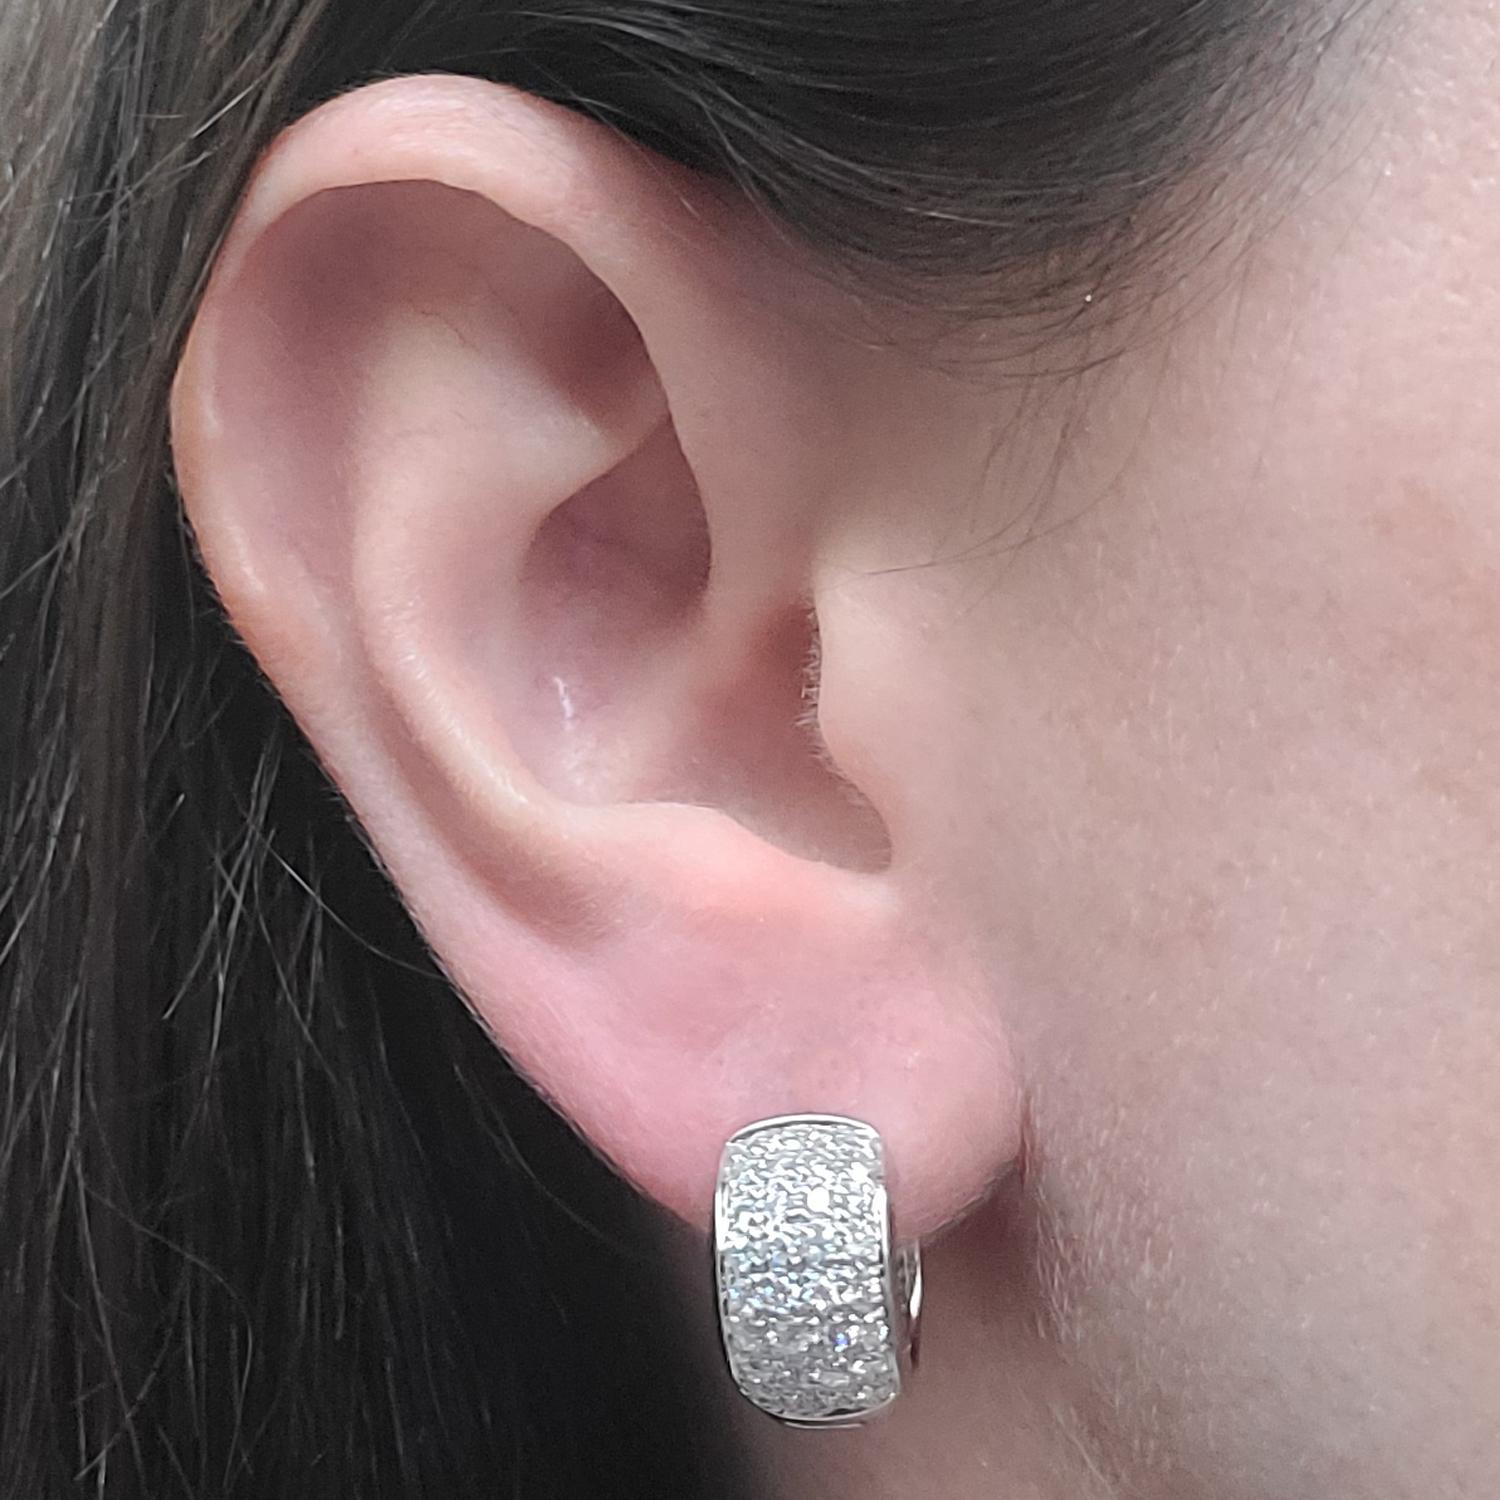 14 Karat White Gold Rounded Pave Huggie Hoop Earrings Featuring 64 Round Brilliant Cut Diamonds Of VS Clarity & G/H Color Totaling Approximately 1.00 Carat. Finished Weight Is 7.8 Grams. Post With Hinged Snap Back.